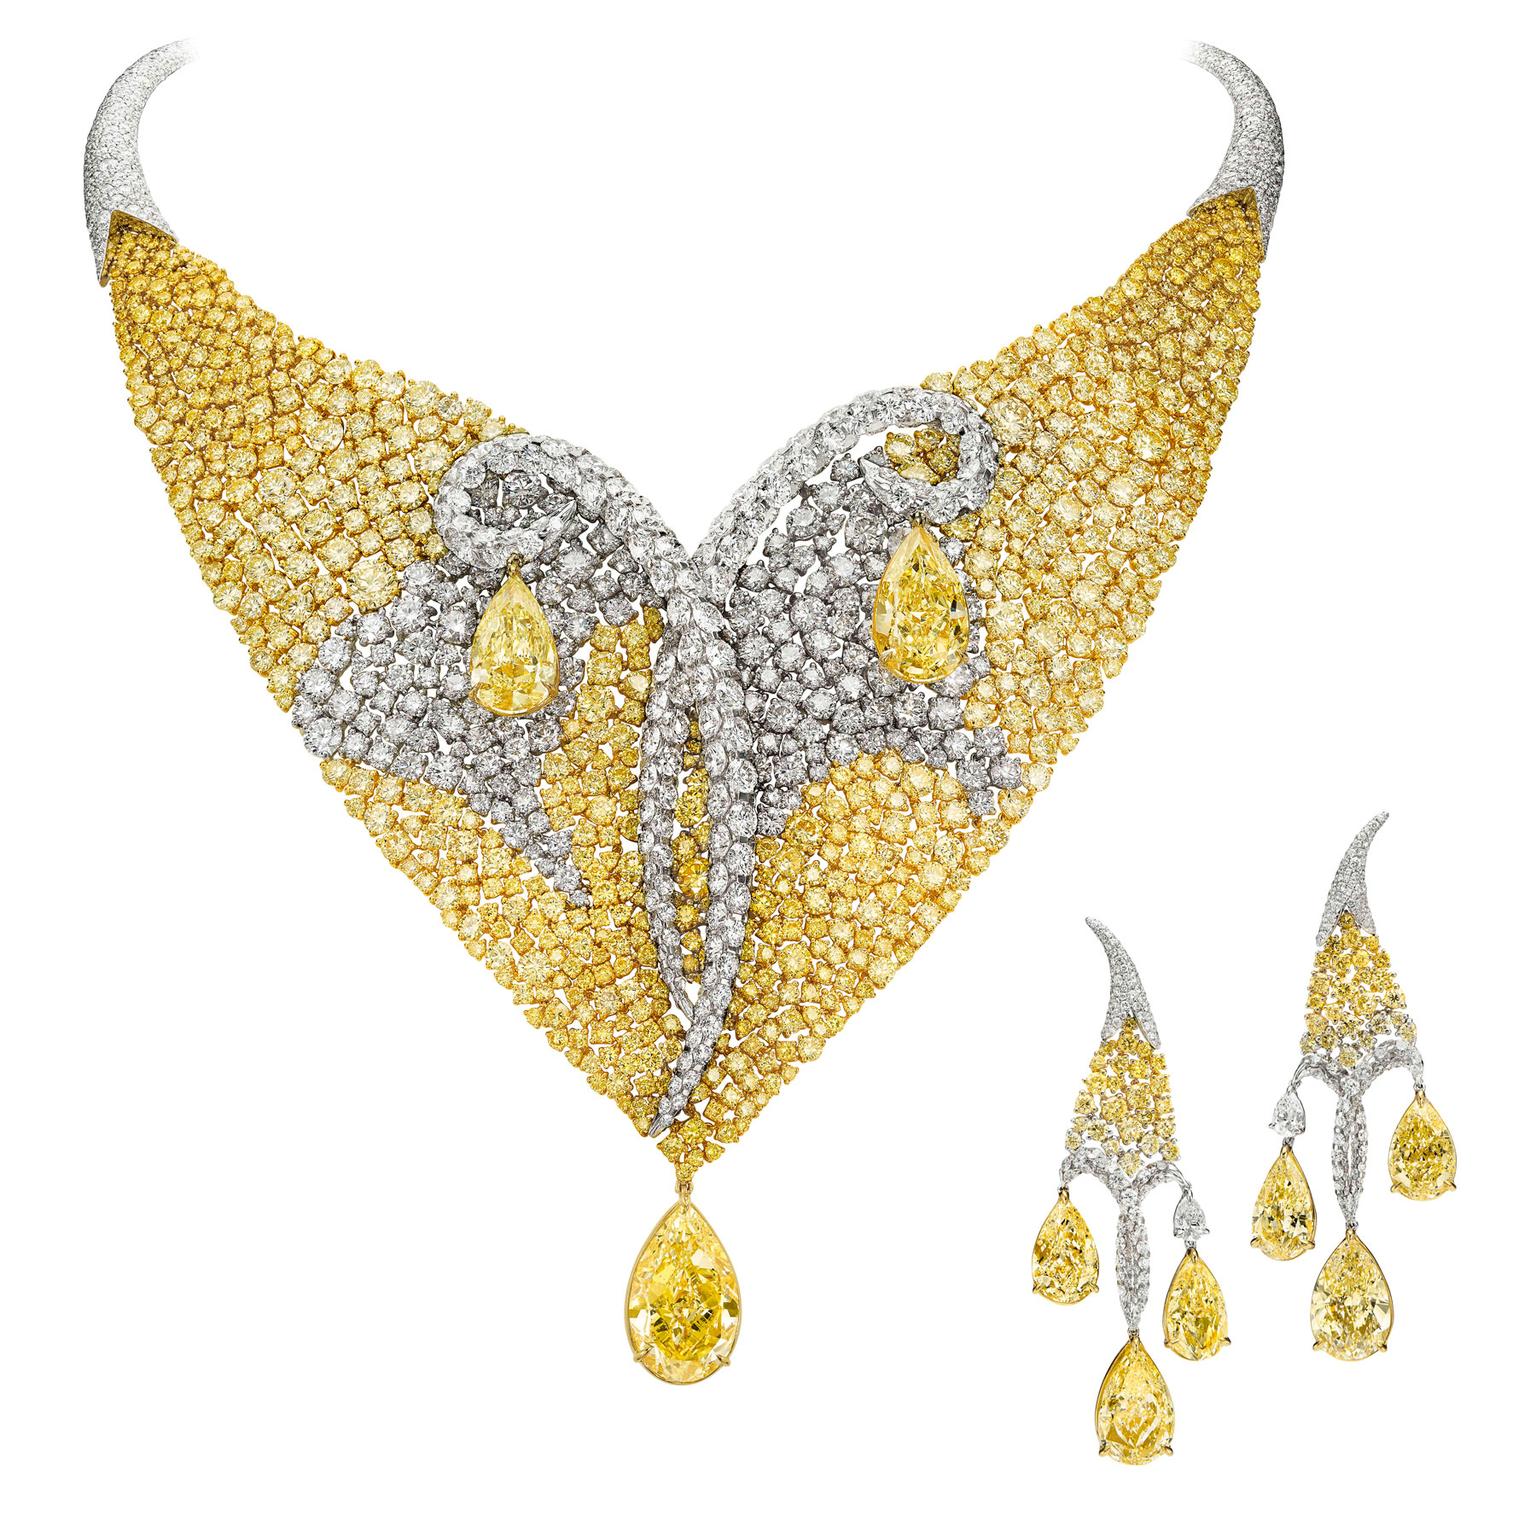 Boghossian Les Merveilles Meche yellow and white diamond necklace and matching earrings